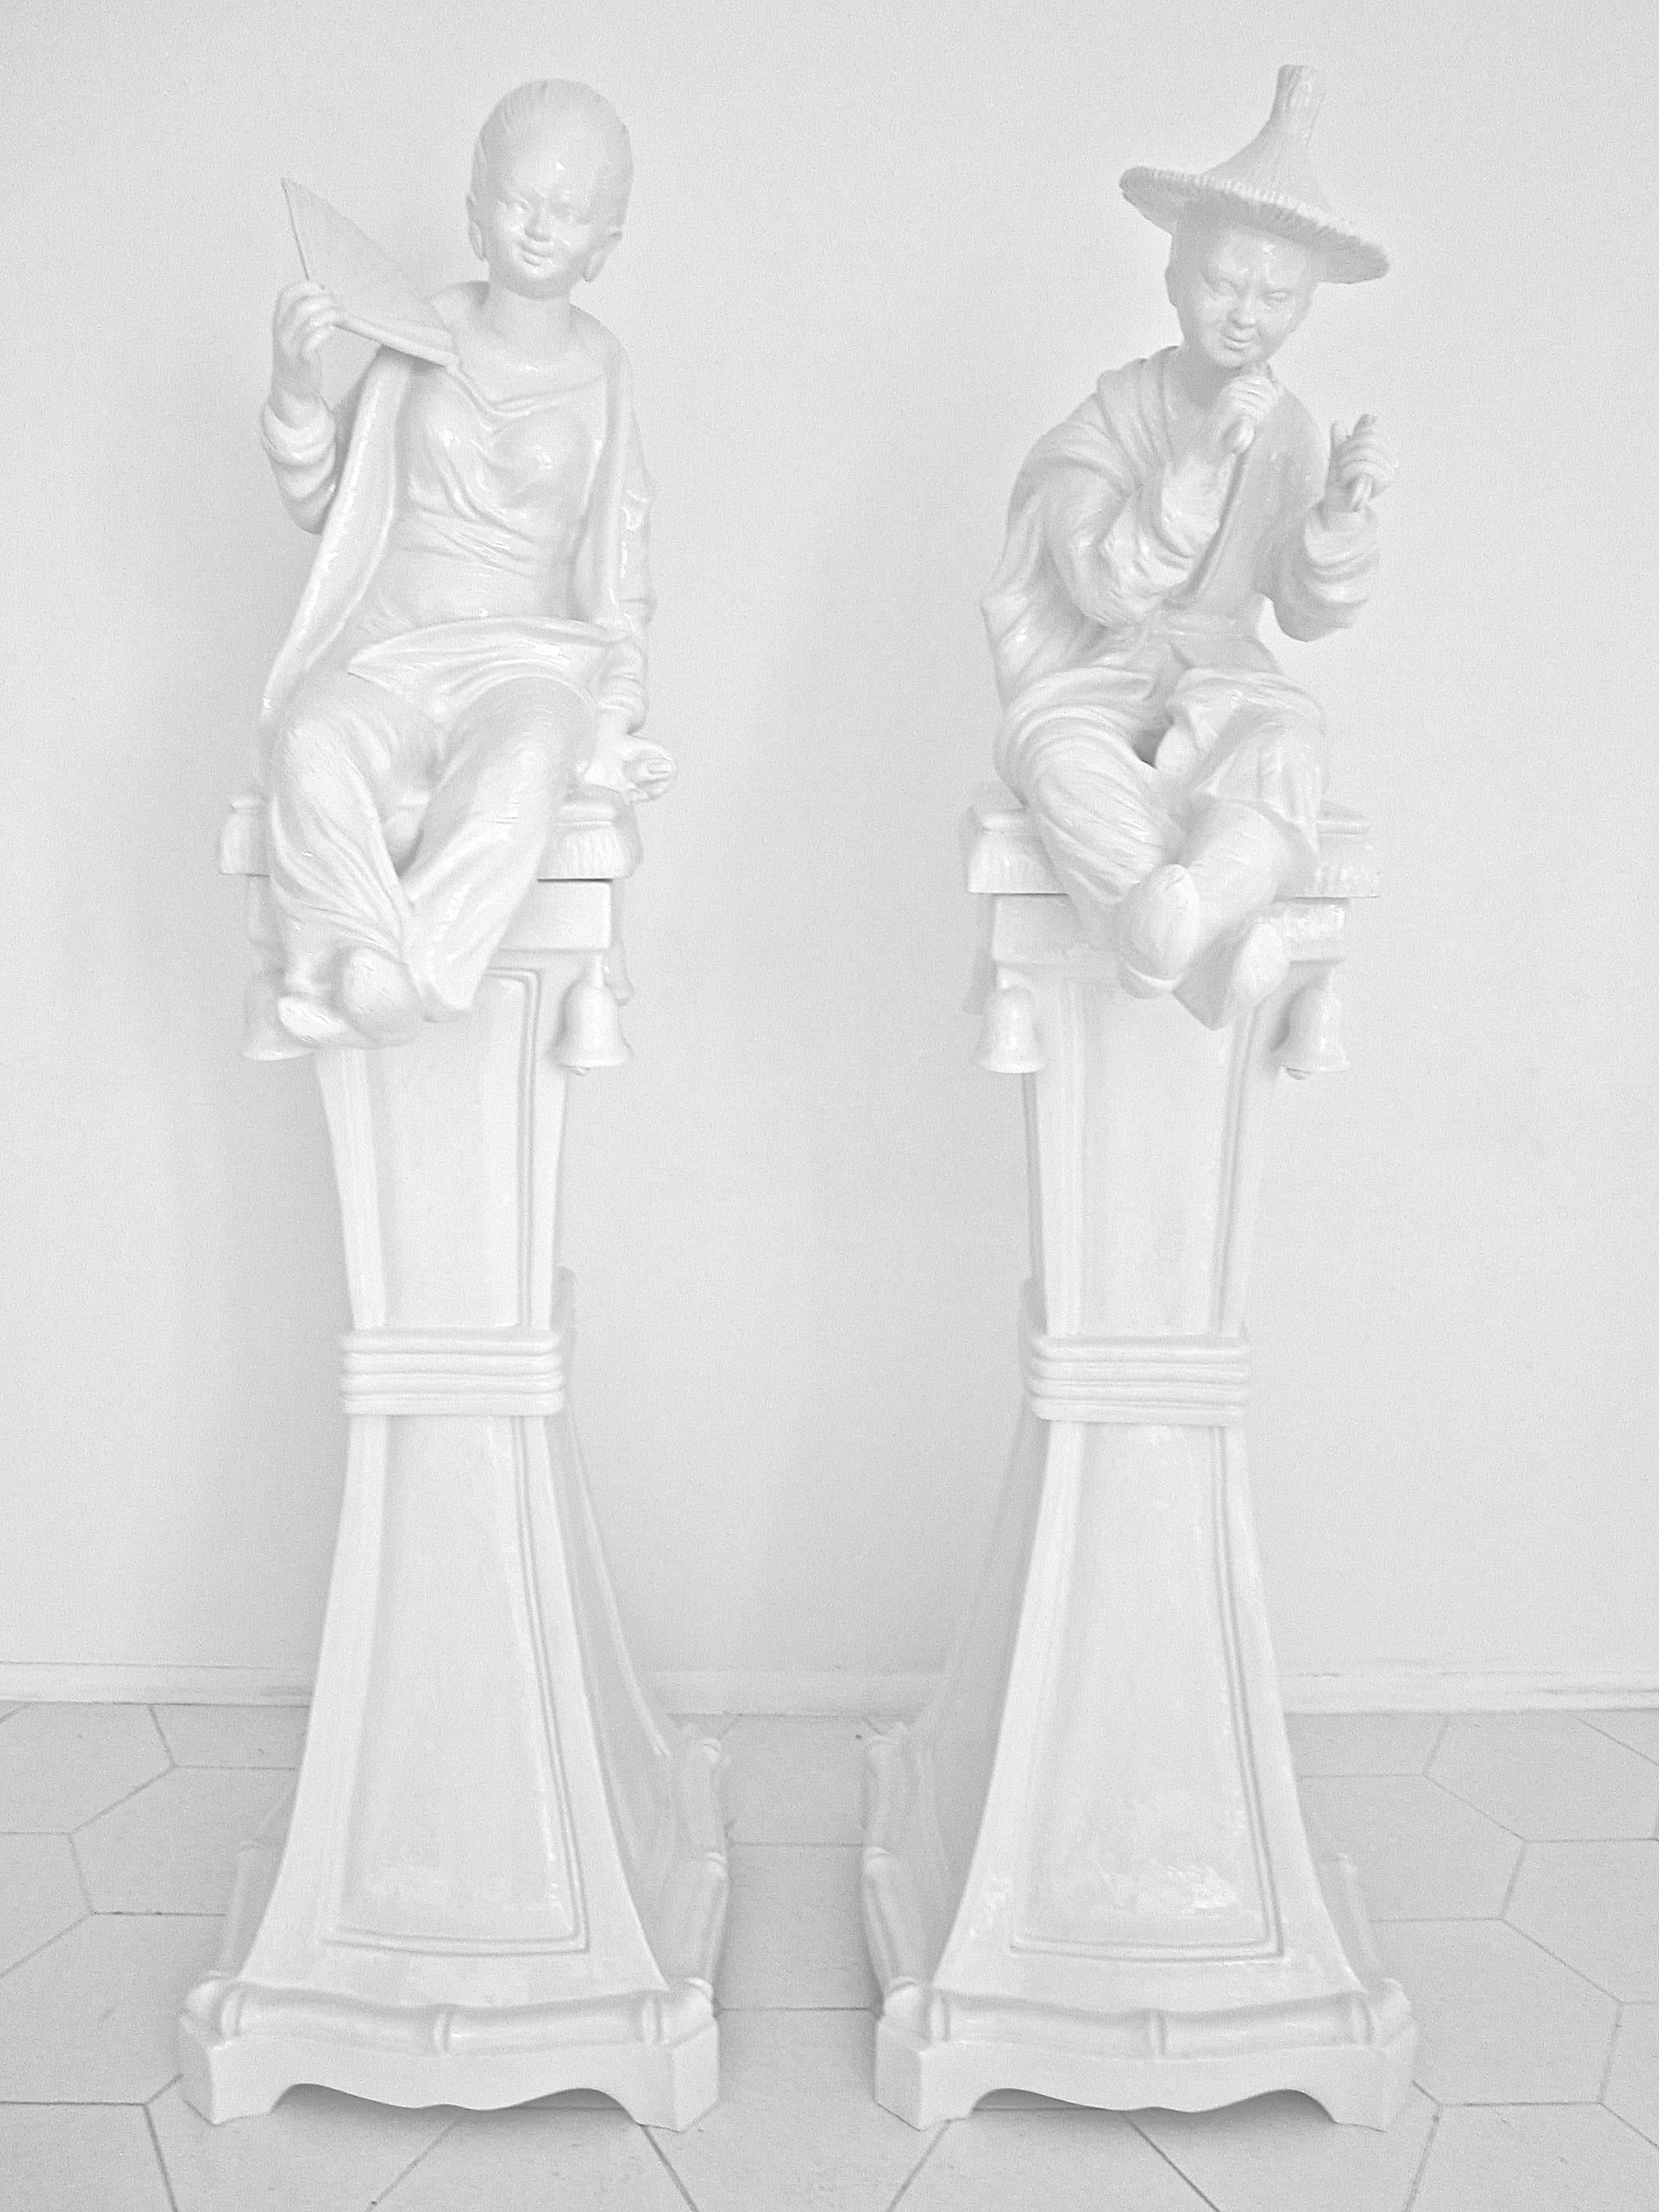 Stunning pair of ceramic statues in the chinoiserie style. Made in Italy with the sticker remaining, these statues of a woman and a man Stand almost six feet tall. They come apart in three sections for transport. See closeup images of the exquisite